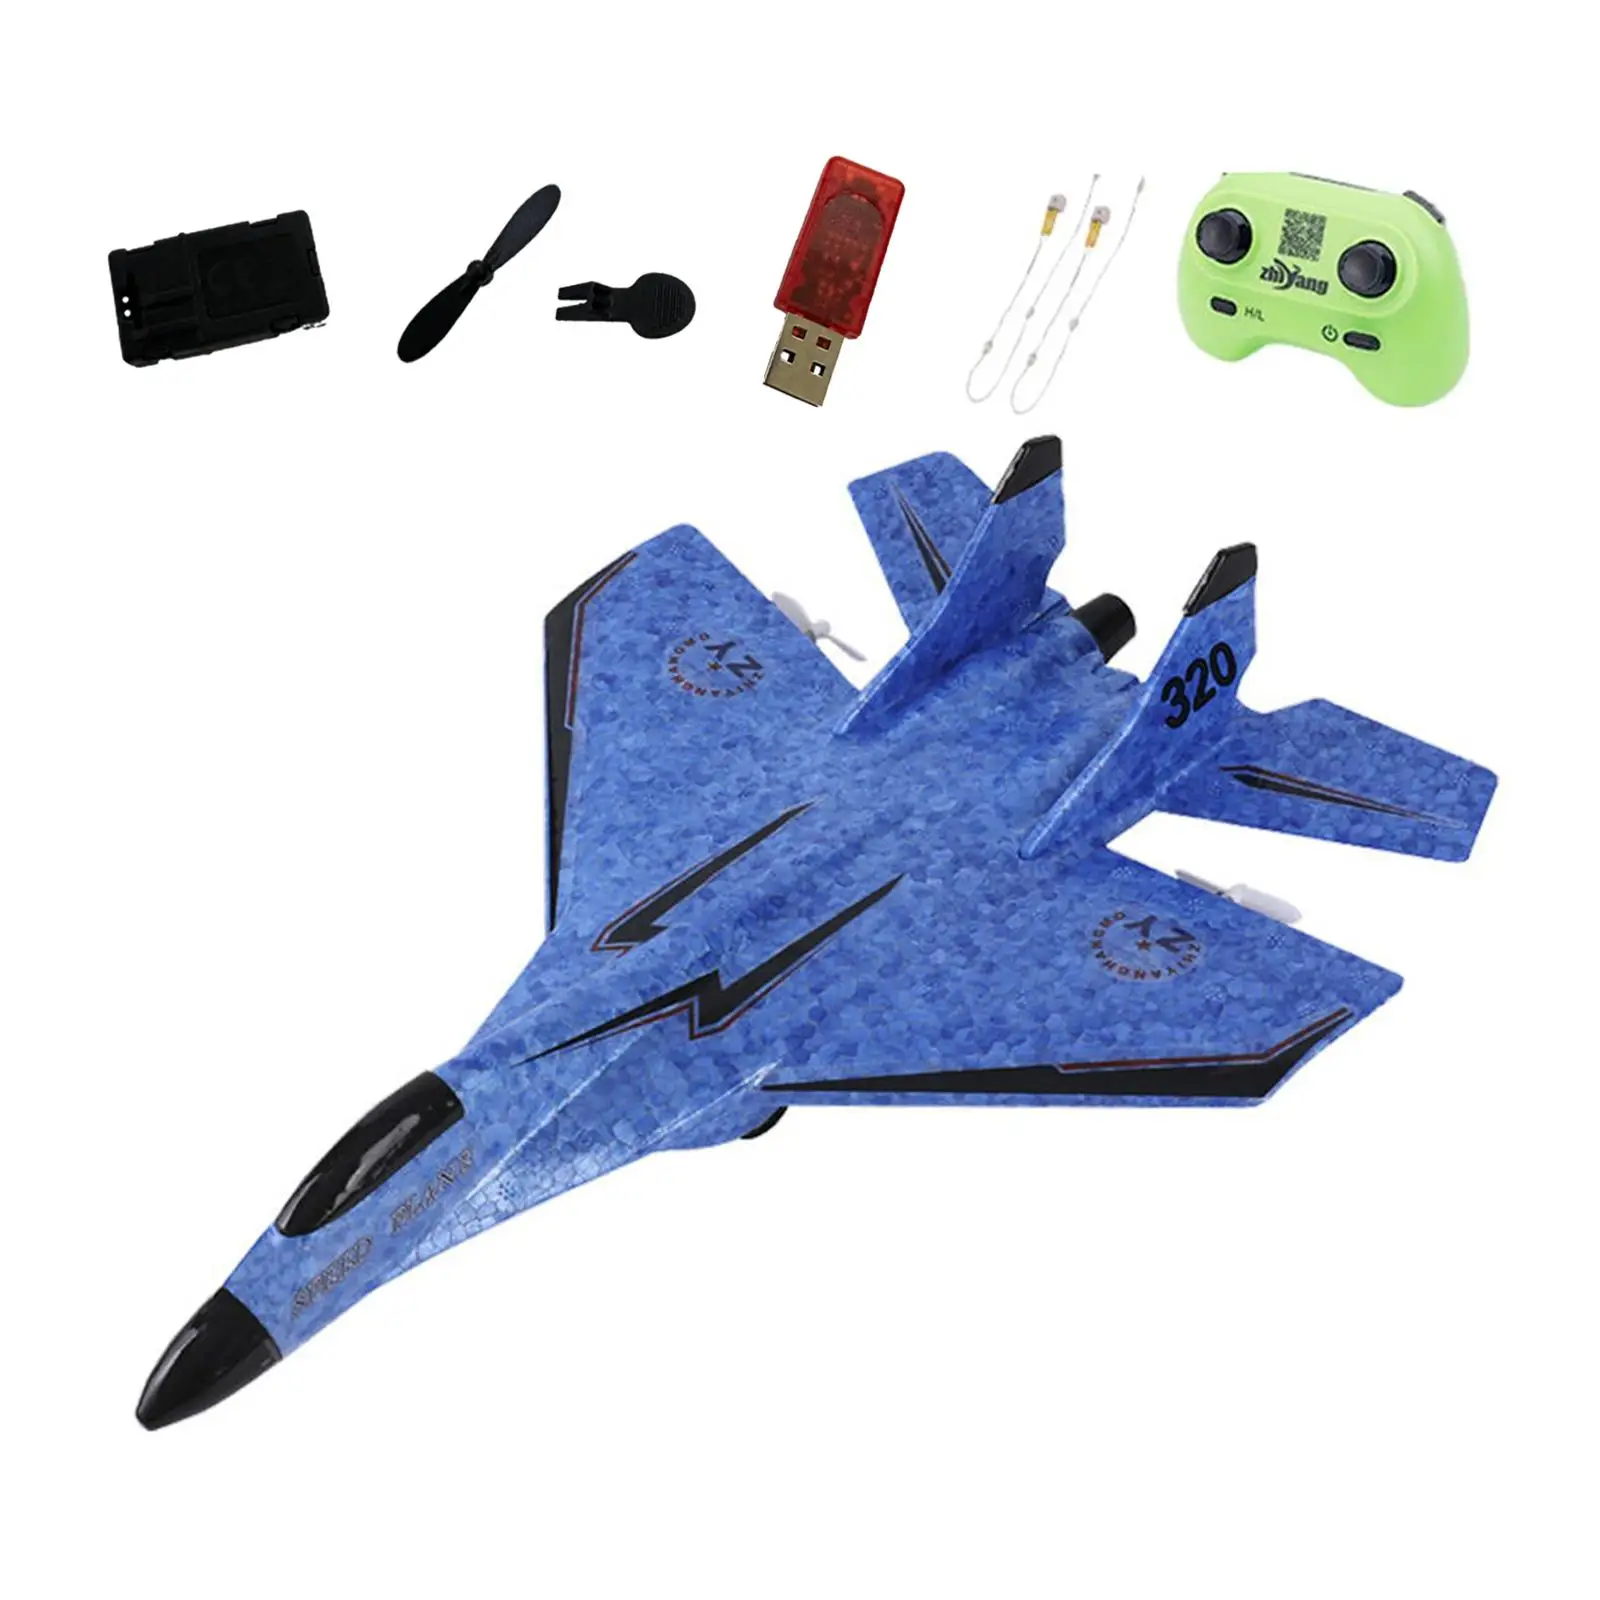 RC Glider Jet Fighter Remote Control Aircraft 2 Channels with Night Light RC Foam Airplane Model Toy for Beginners Ready to Fly